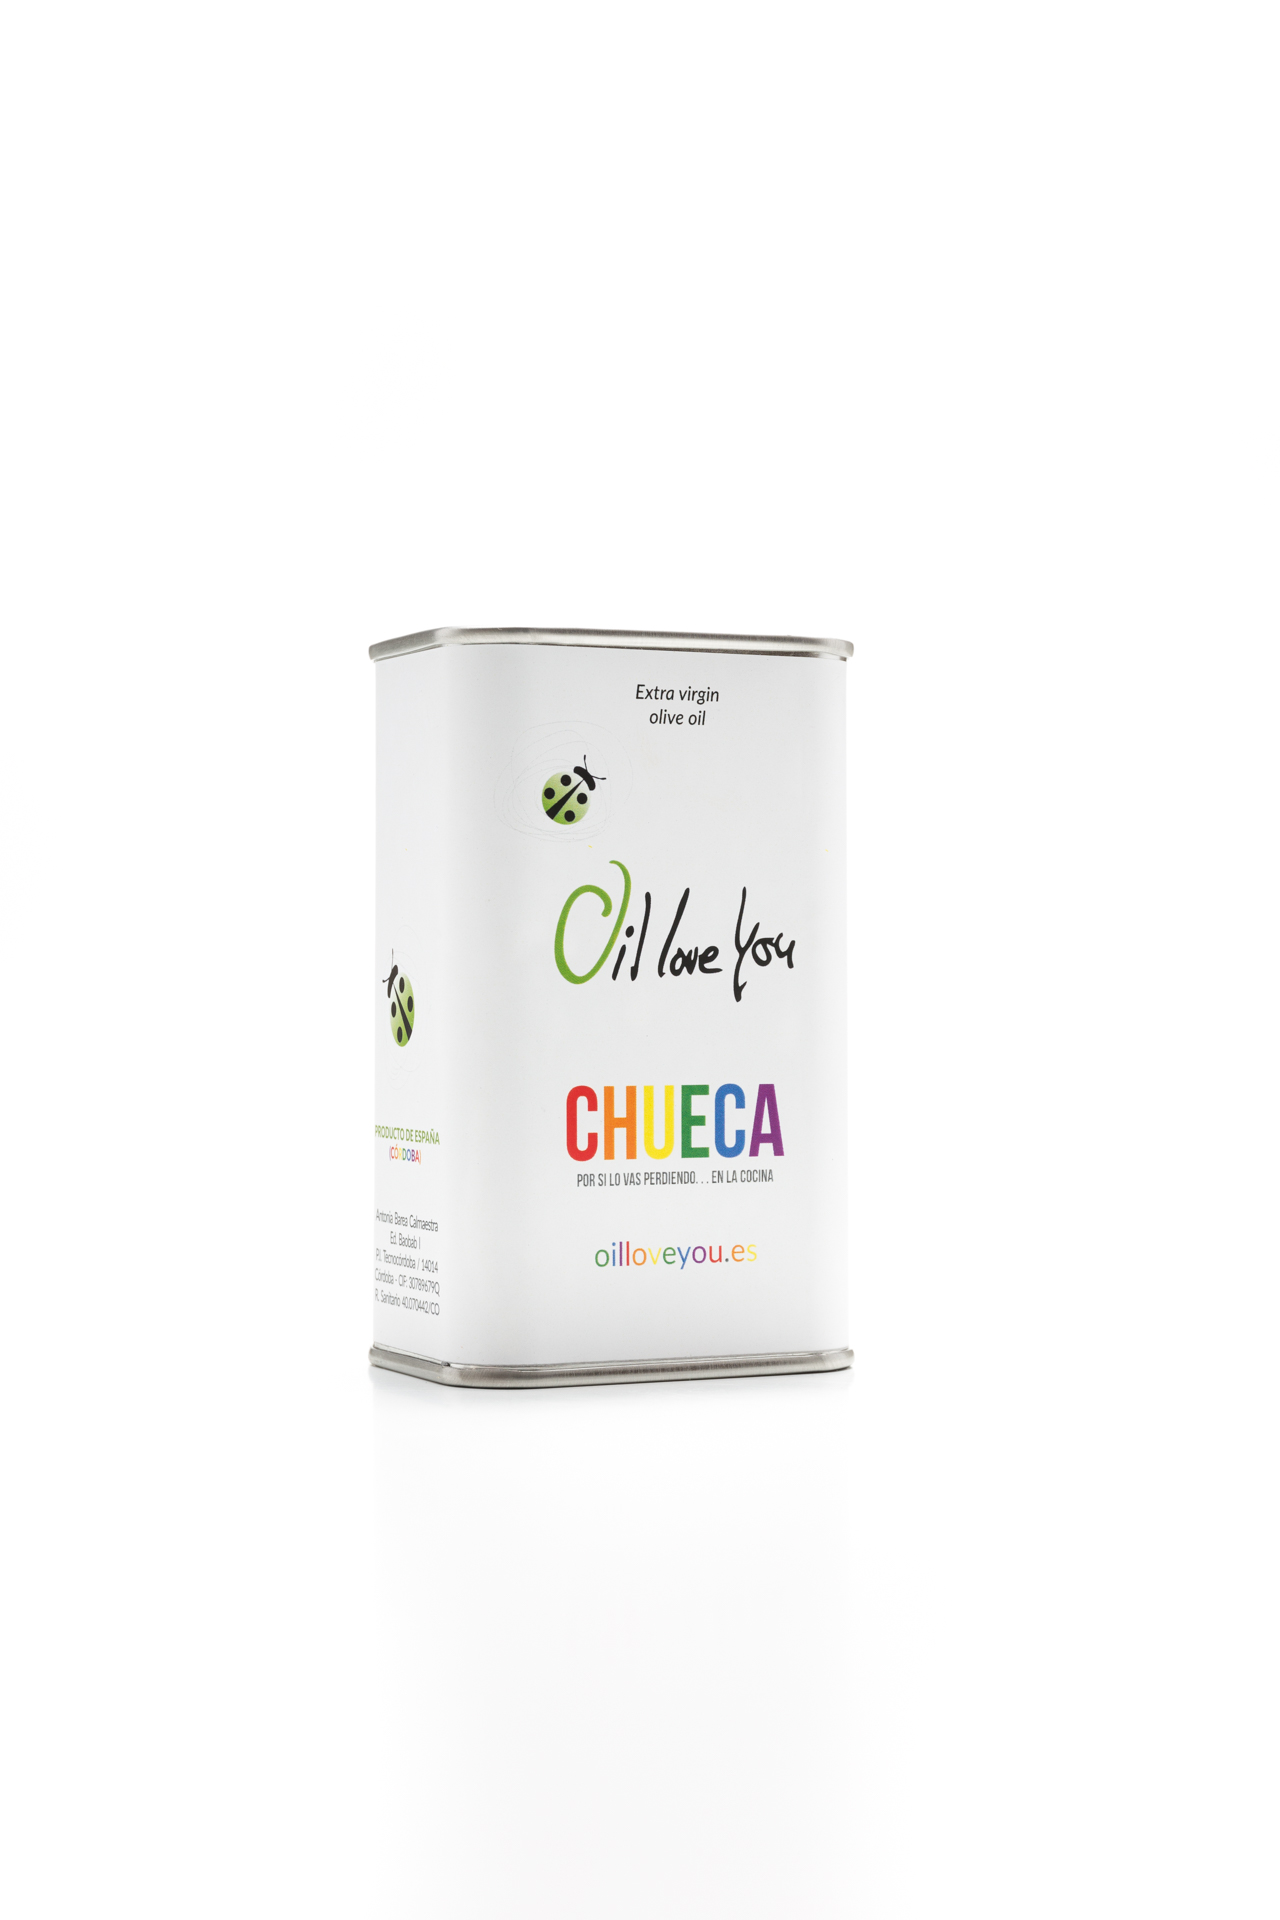 Can of EVOO Oil Love You 250 ml «CHUECA» Edition (3)